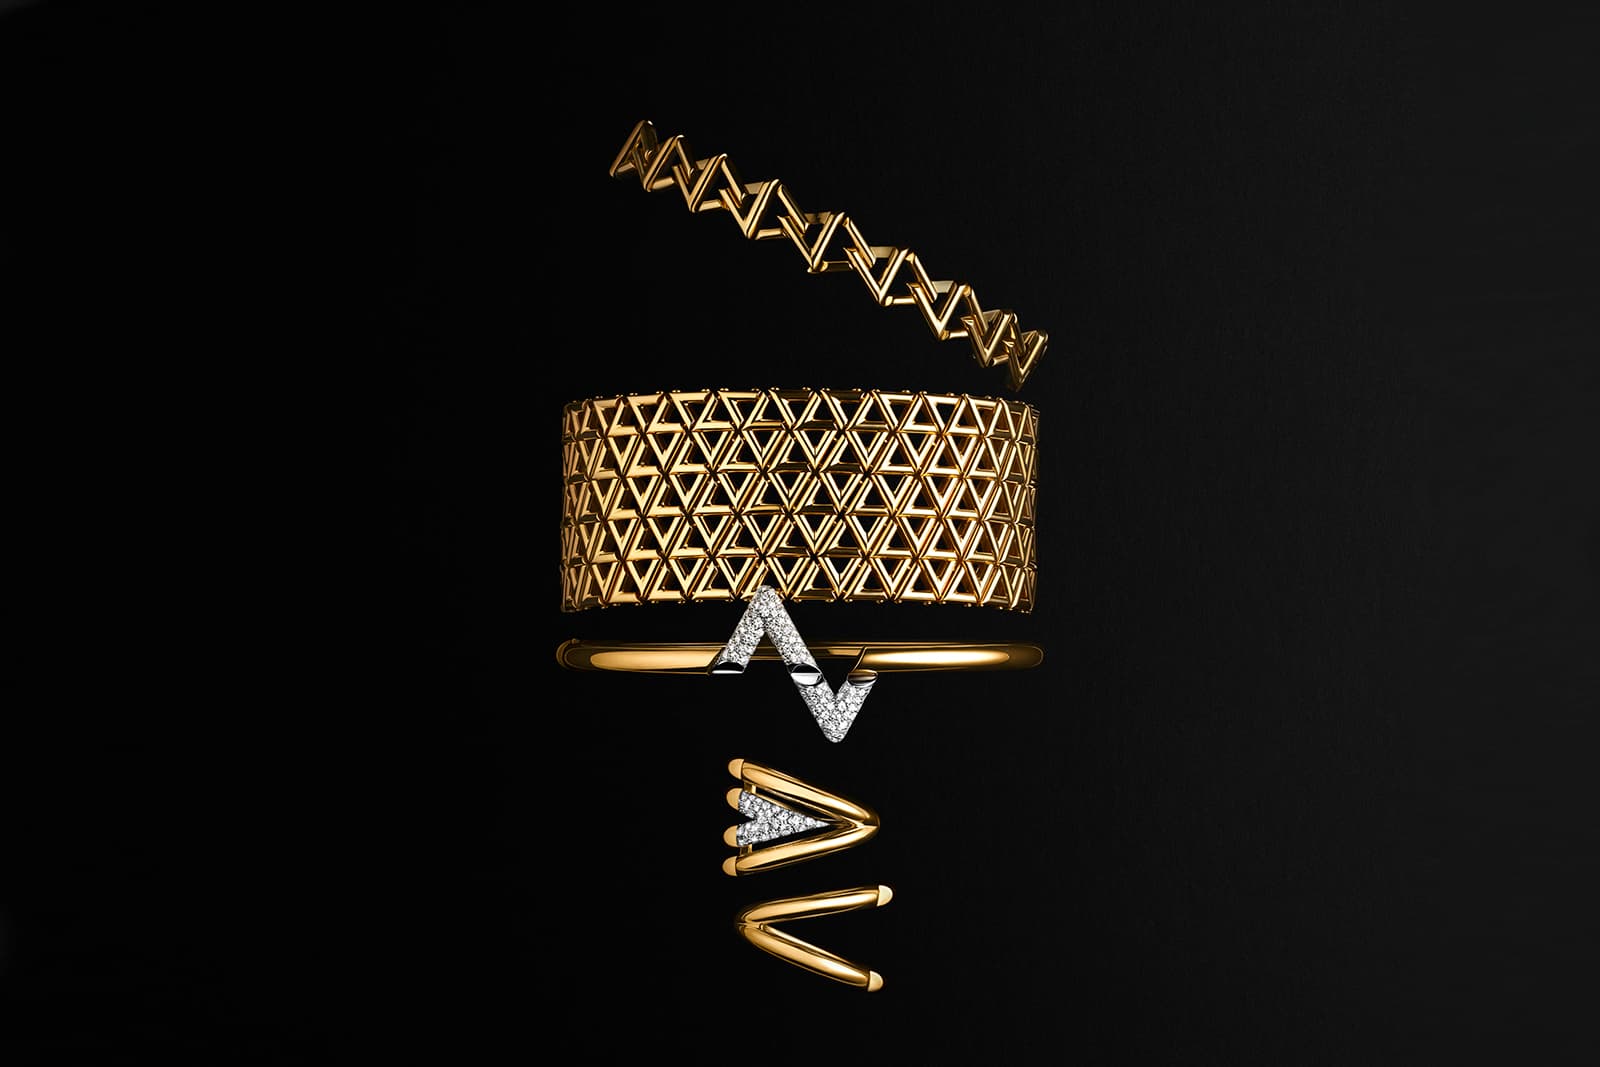 Louis Vuitton's dazzling new LV Volt fine jewelry collection banks